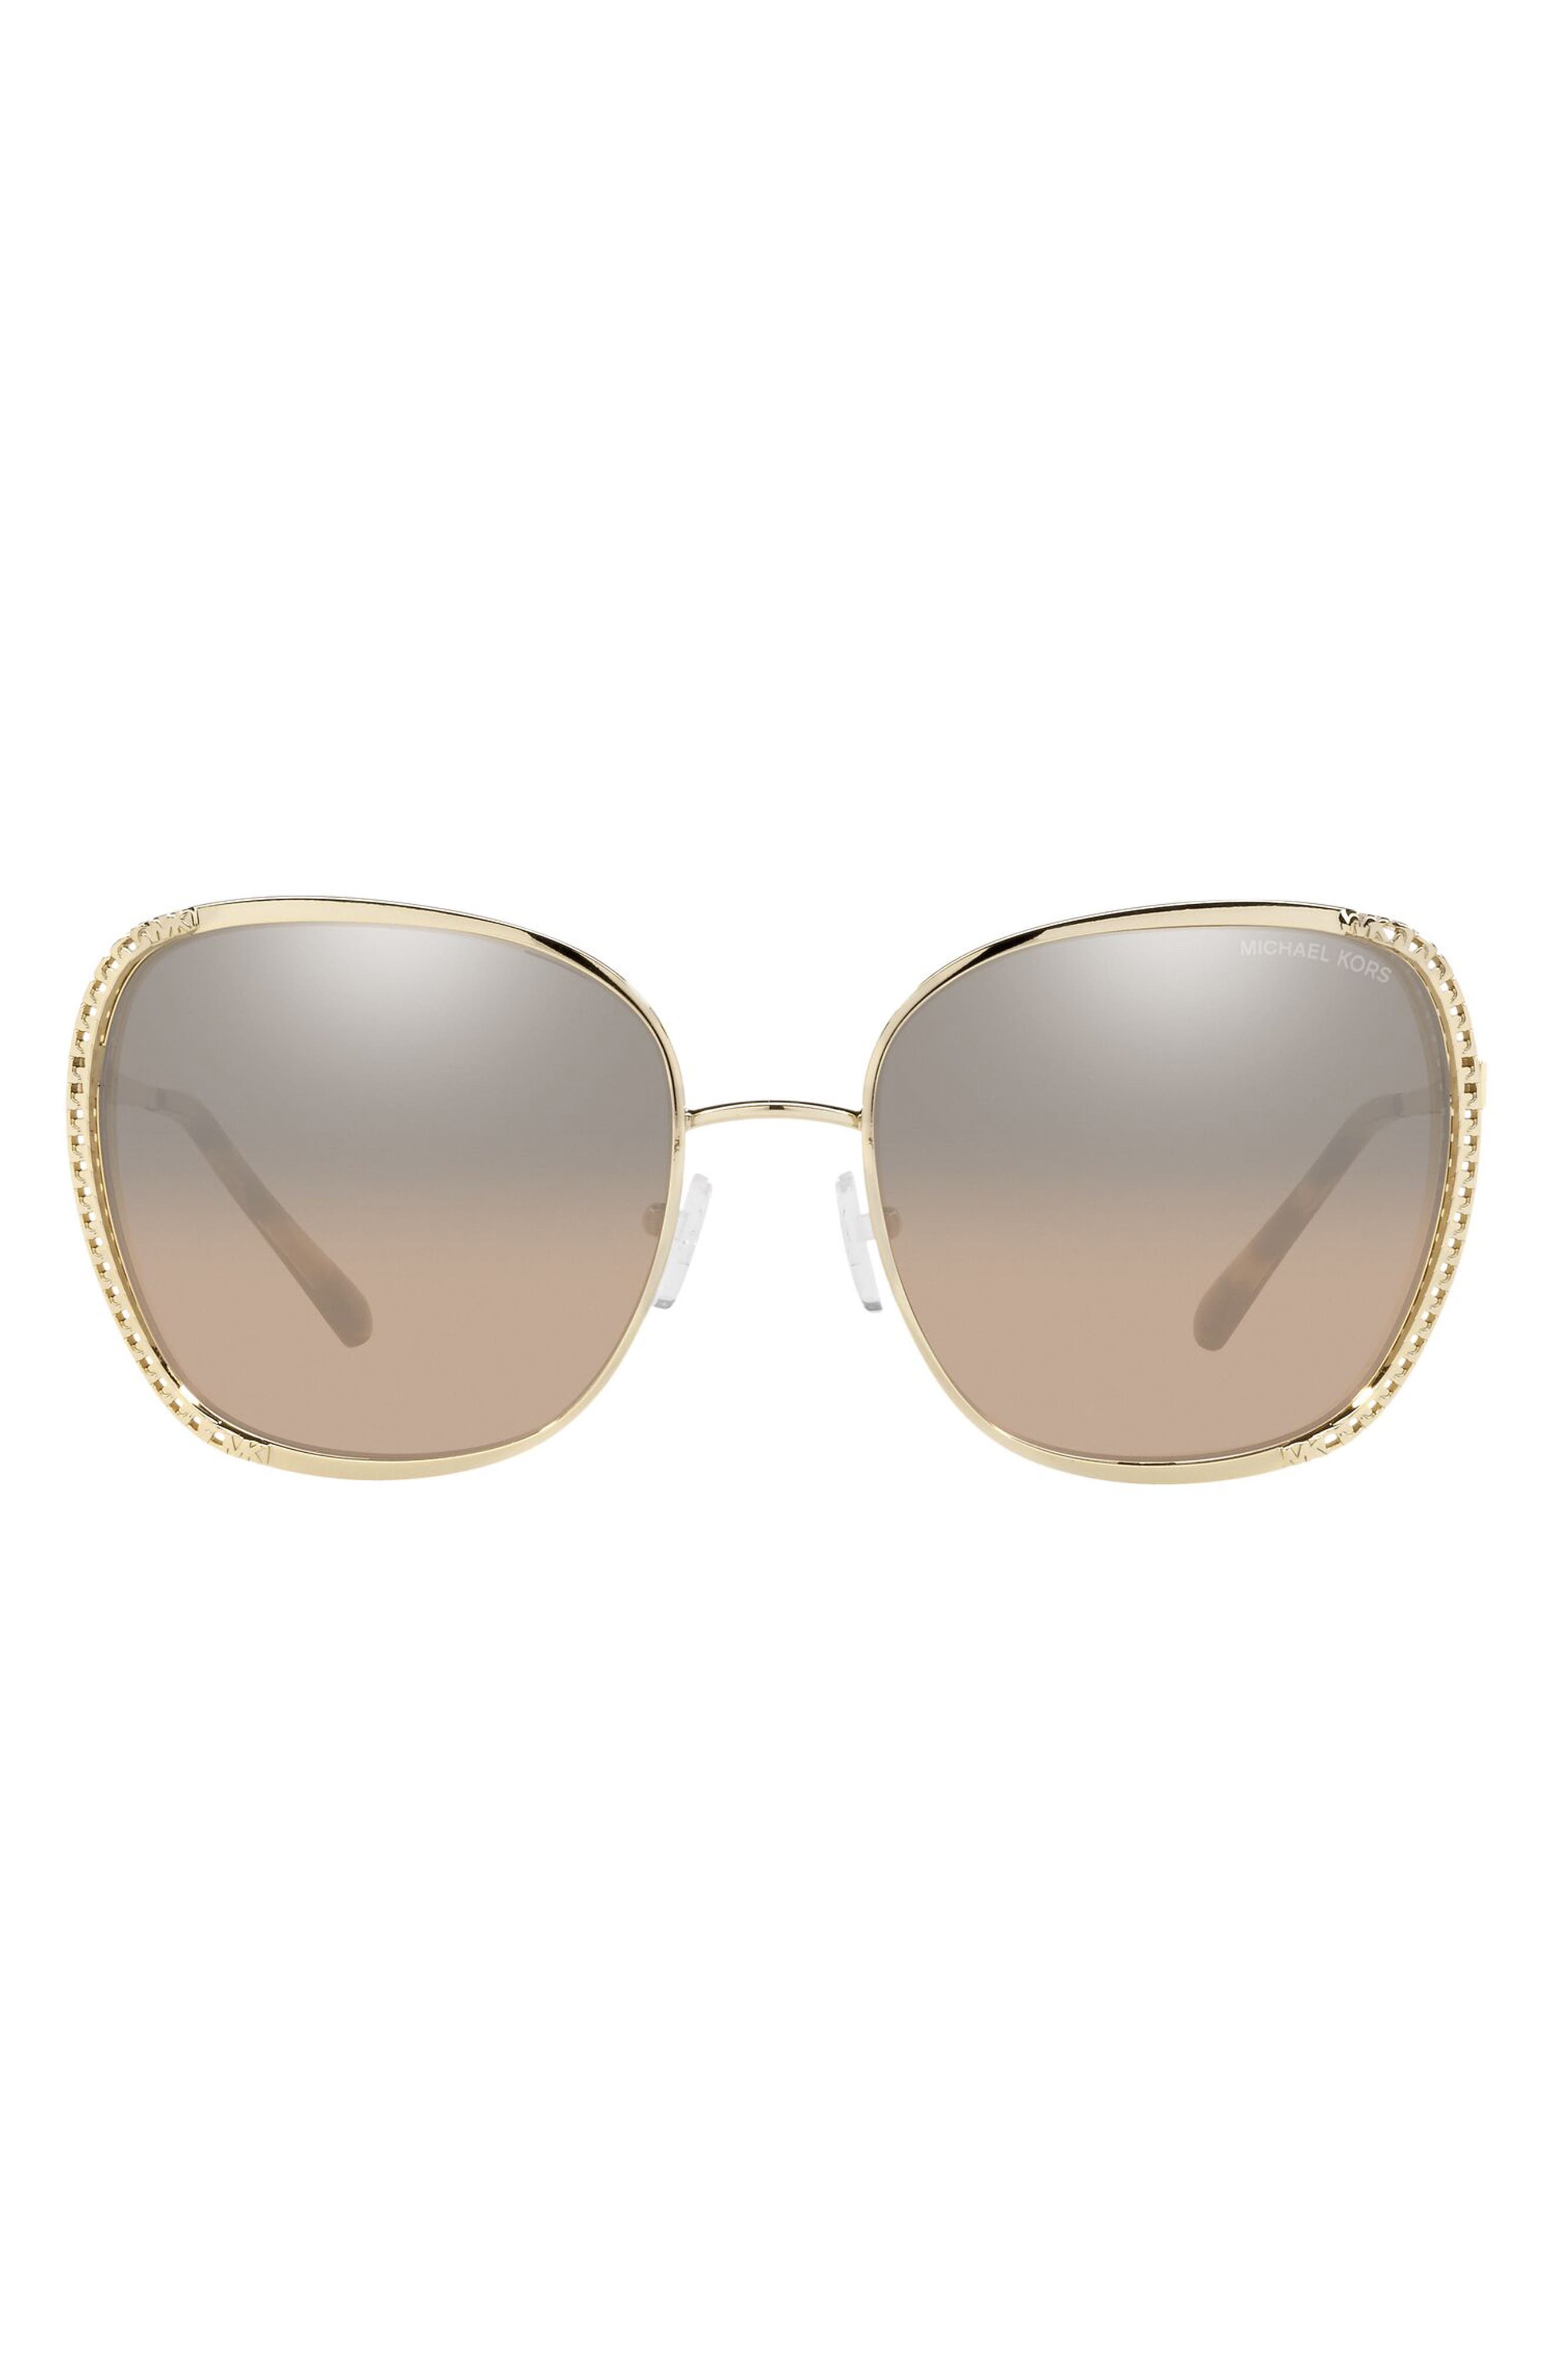 Michael Kors 59mm Round Sunglasses in Light Gold at Nordstrom